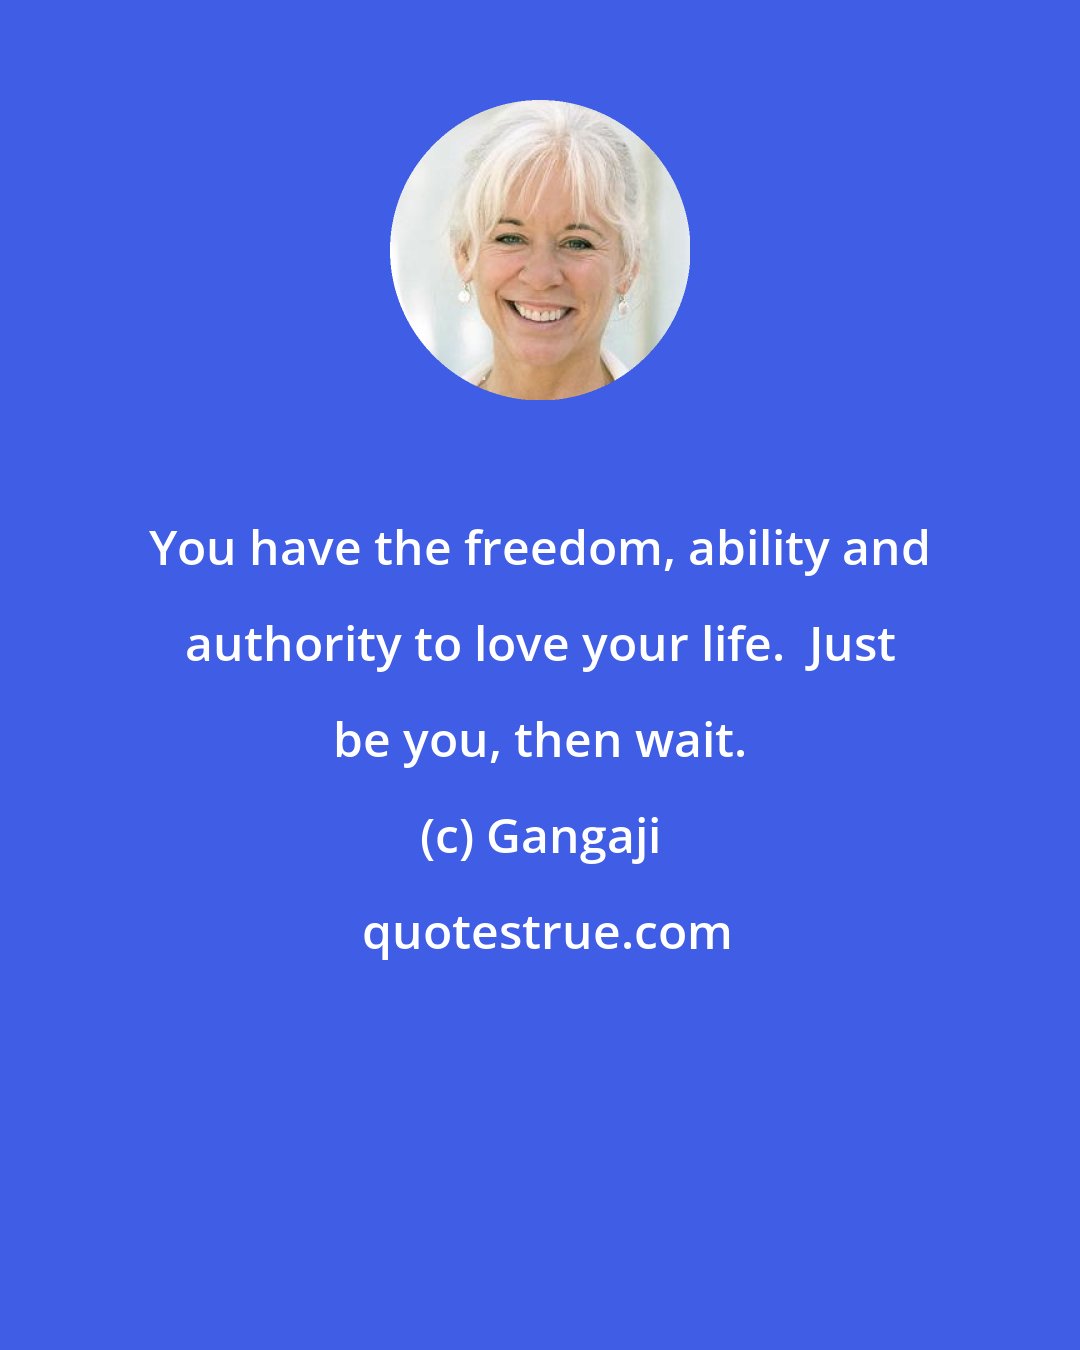 Gangaji: You have the freedom, ability and authority to love your life.  Just be you, then wait.